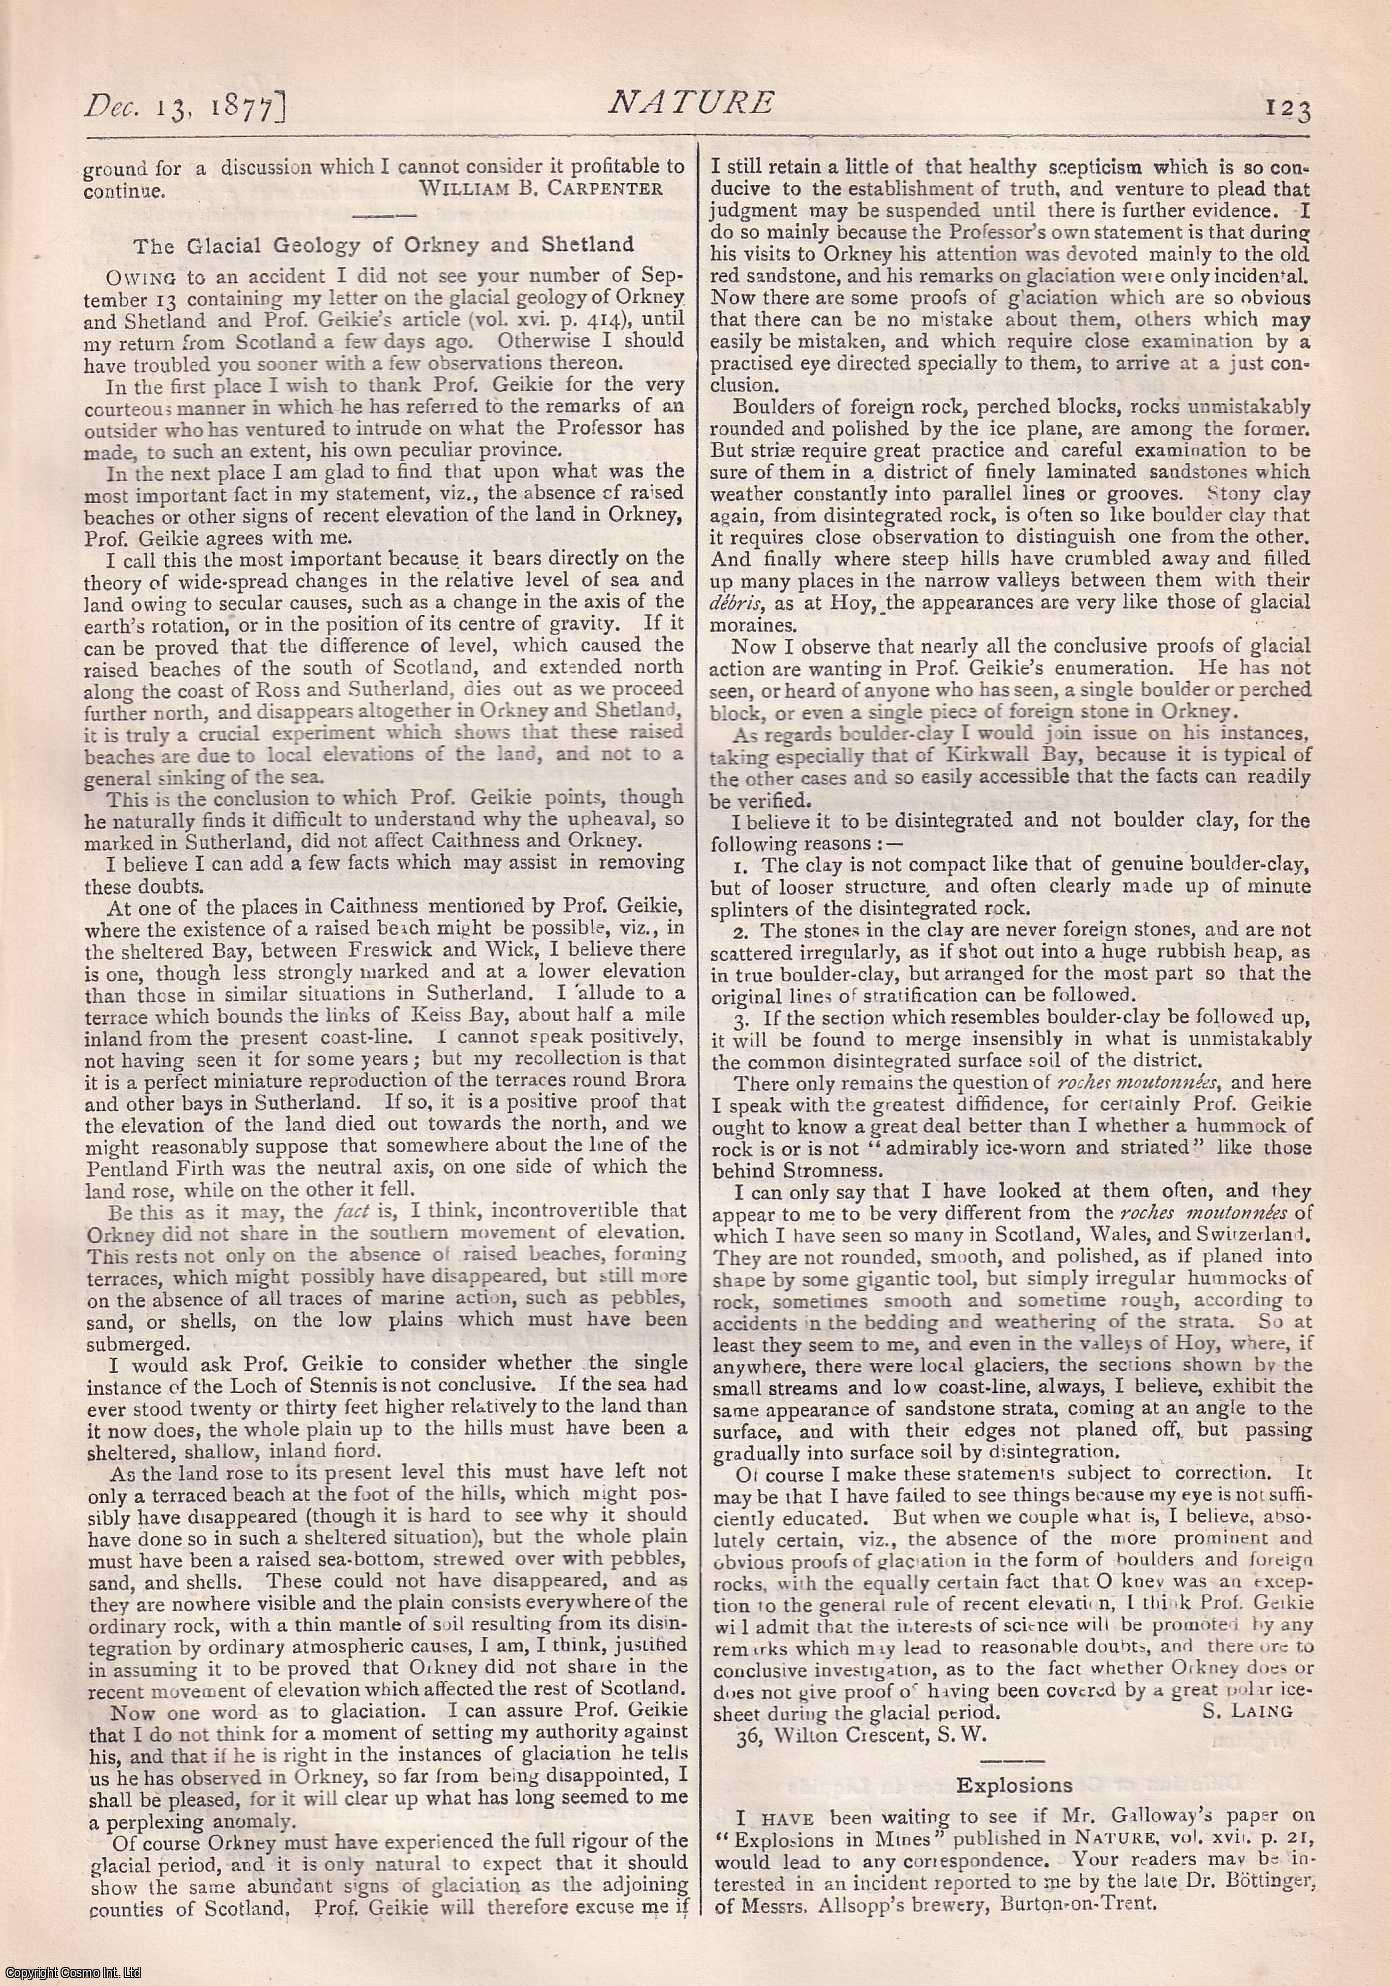 NATURE - The Glacial Geology of Orkney and Shetland, p123 in Nature, Volume 17, Number 424. Nature. A Weekly Journal of Science. Thursday, December 13th, 1877.